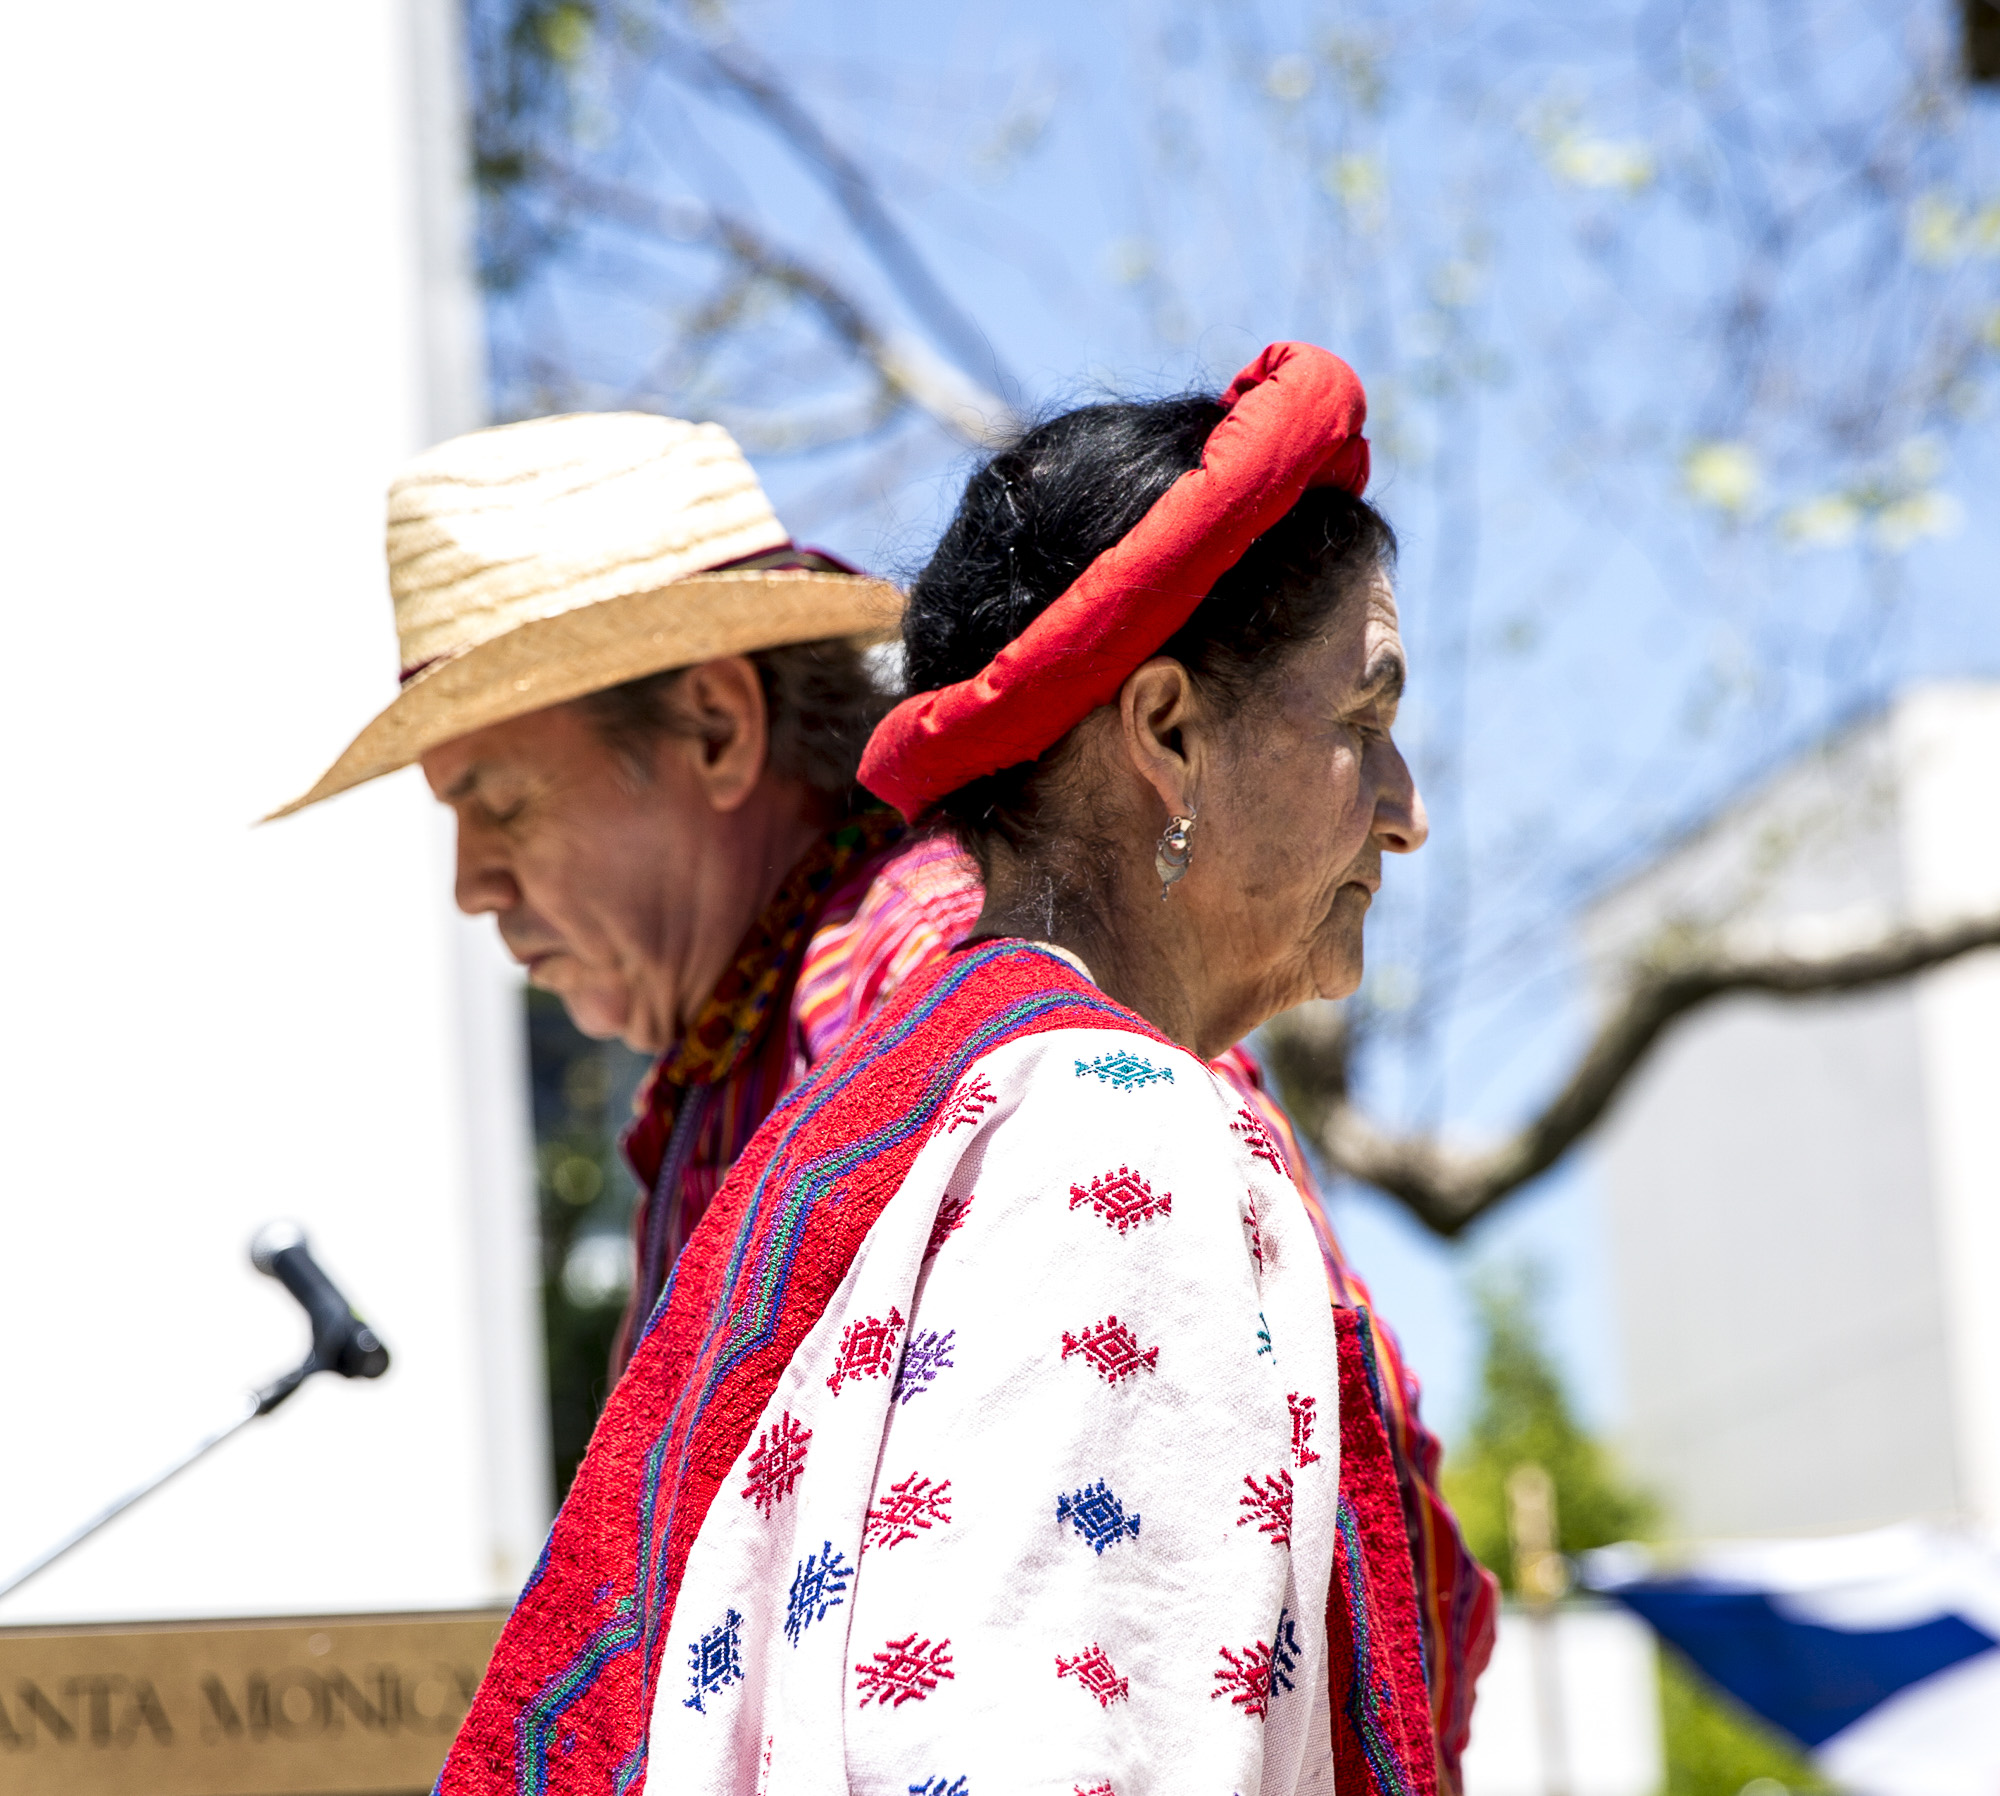  Jorge Granja (behind facing left) and Evita Dubón (infront facing right), members of the group “Folklore: Mi Bella Guatemala”, perform a very slow dance that is native to the country of Guatemala during the Santa Monica College Cinco De Mayo celebra